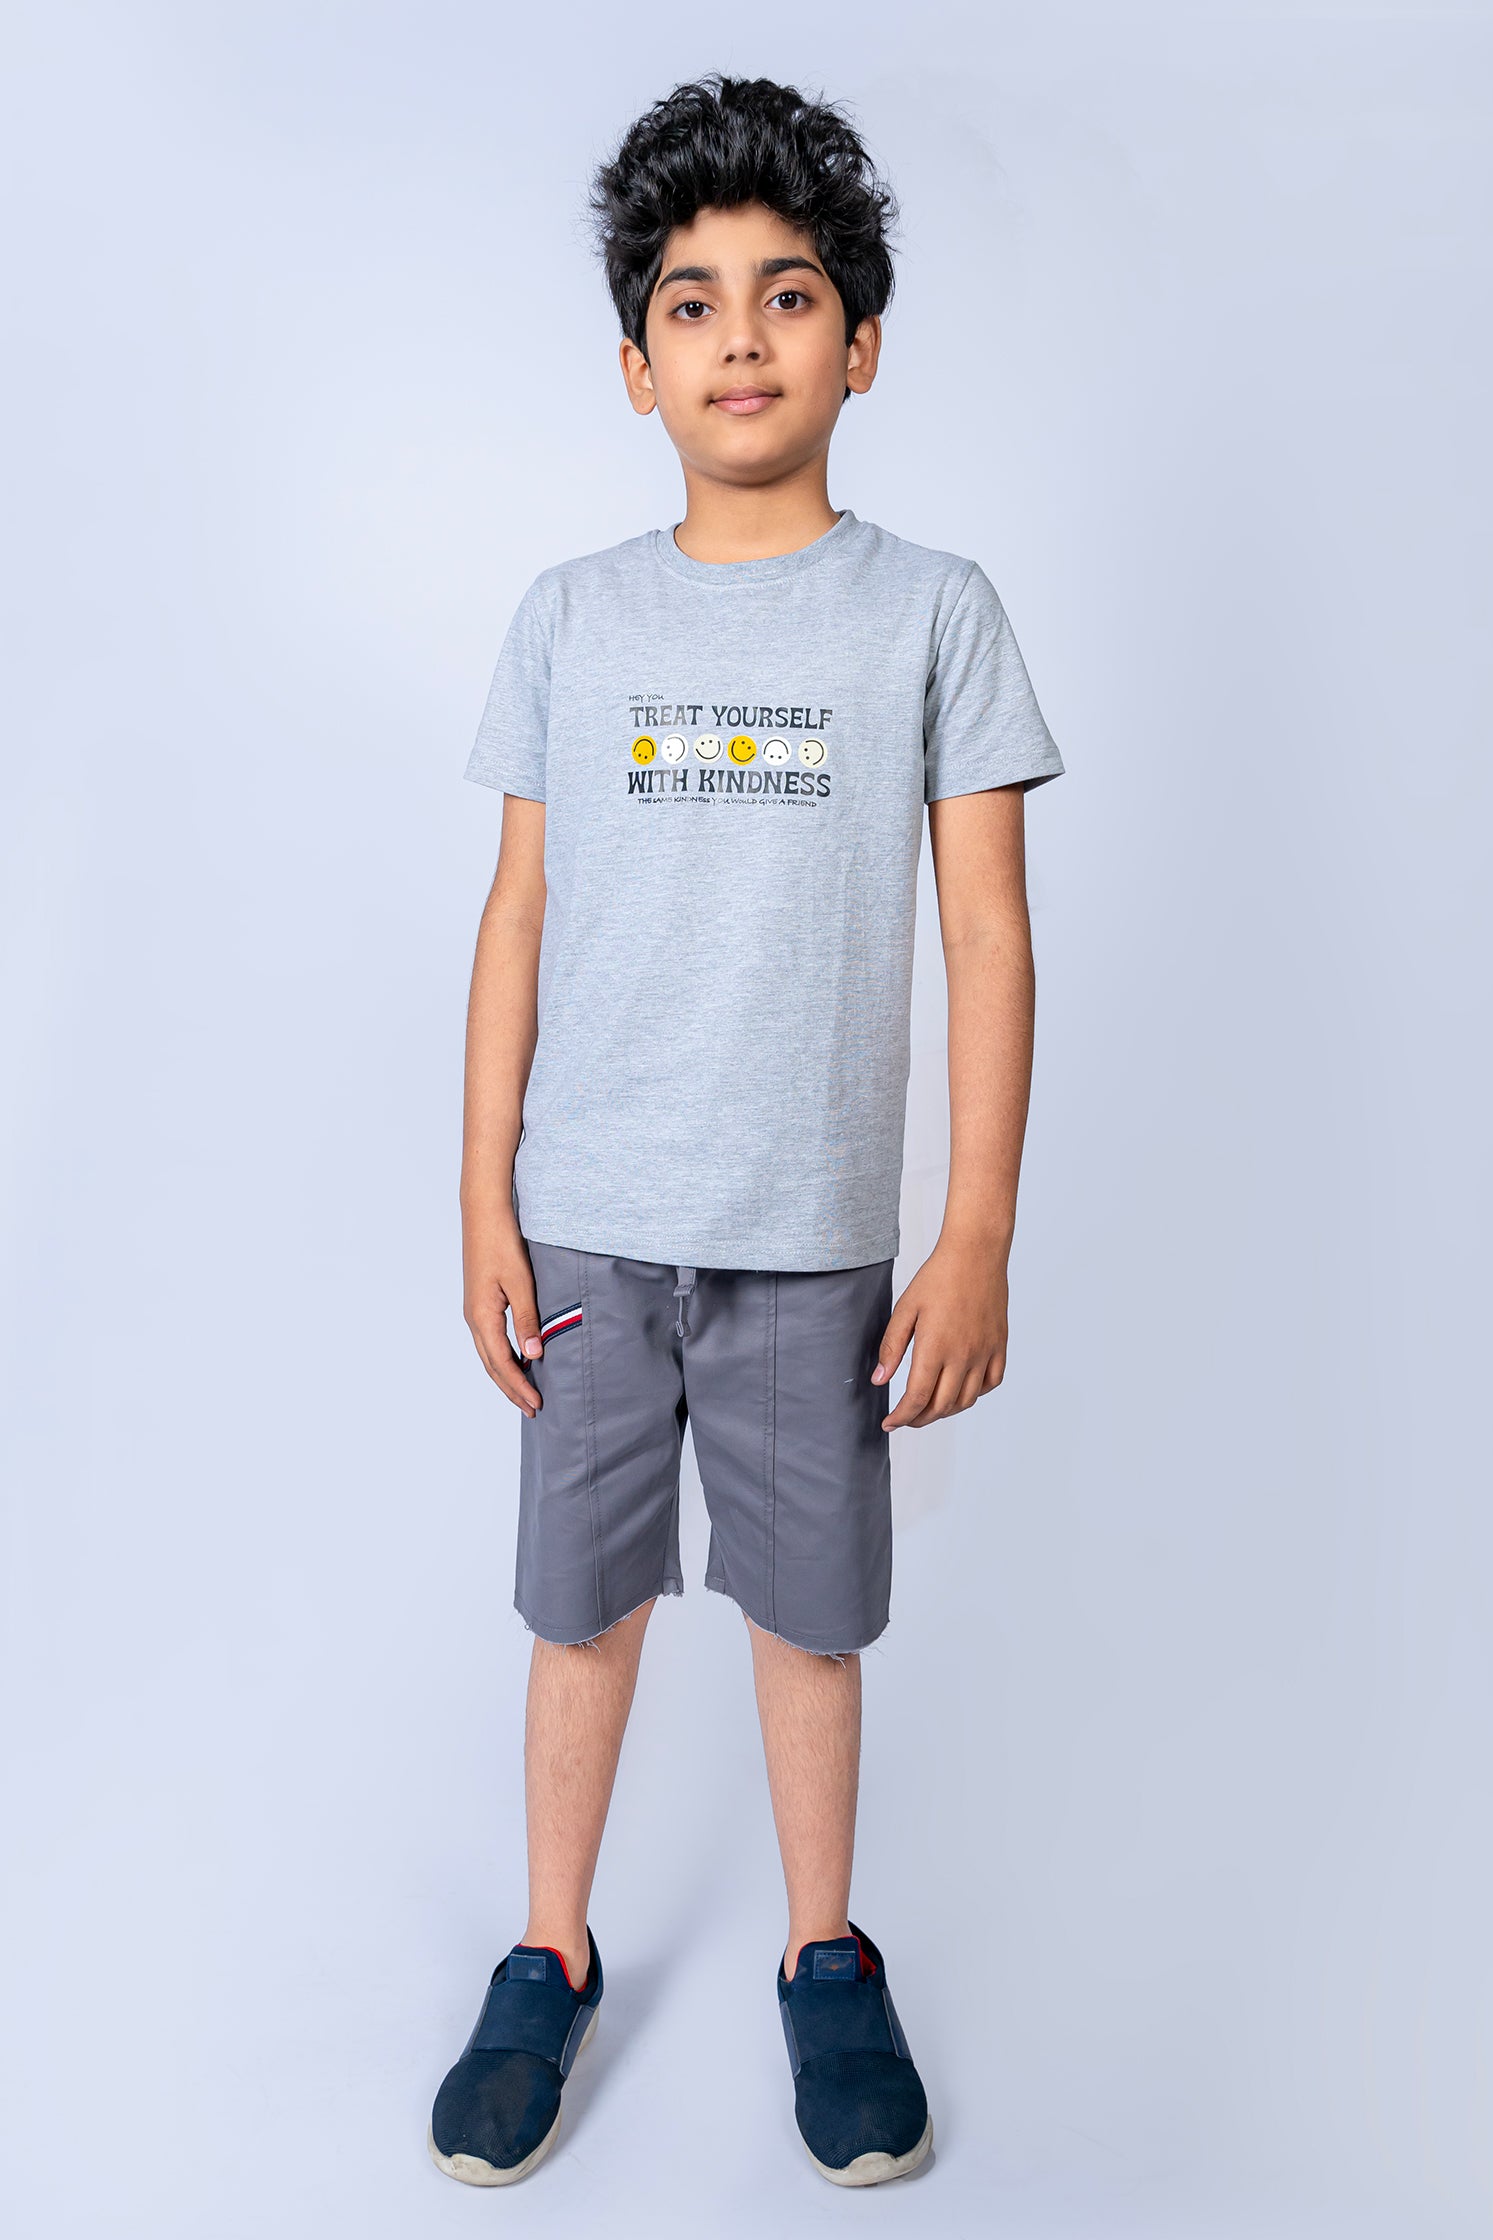 BOYS T-SHIRT GREY WITH "TREAT YOURSELF" PRINTING